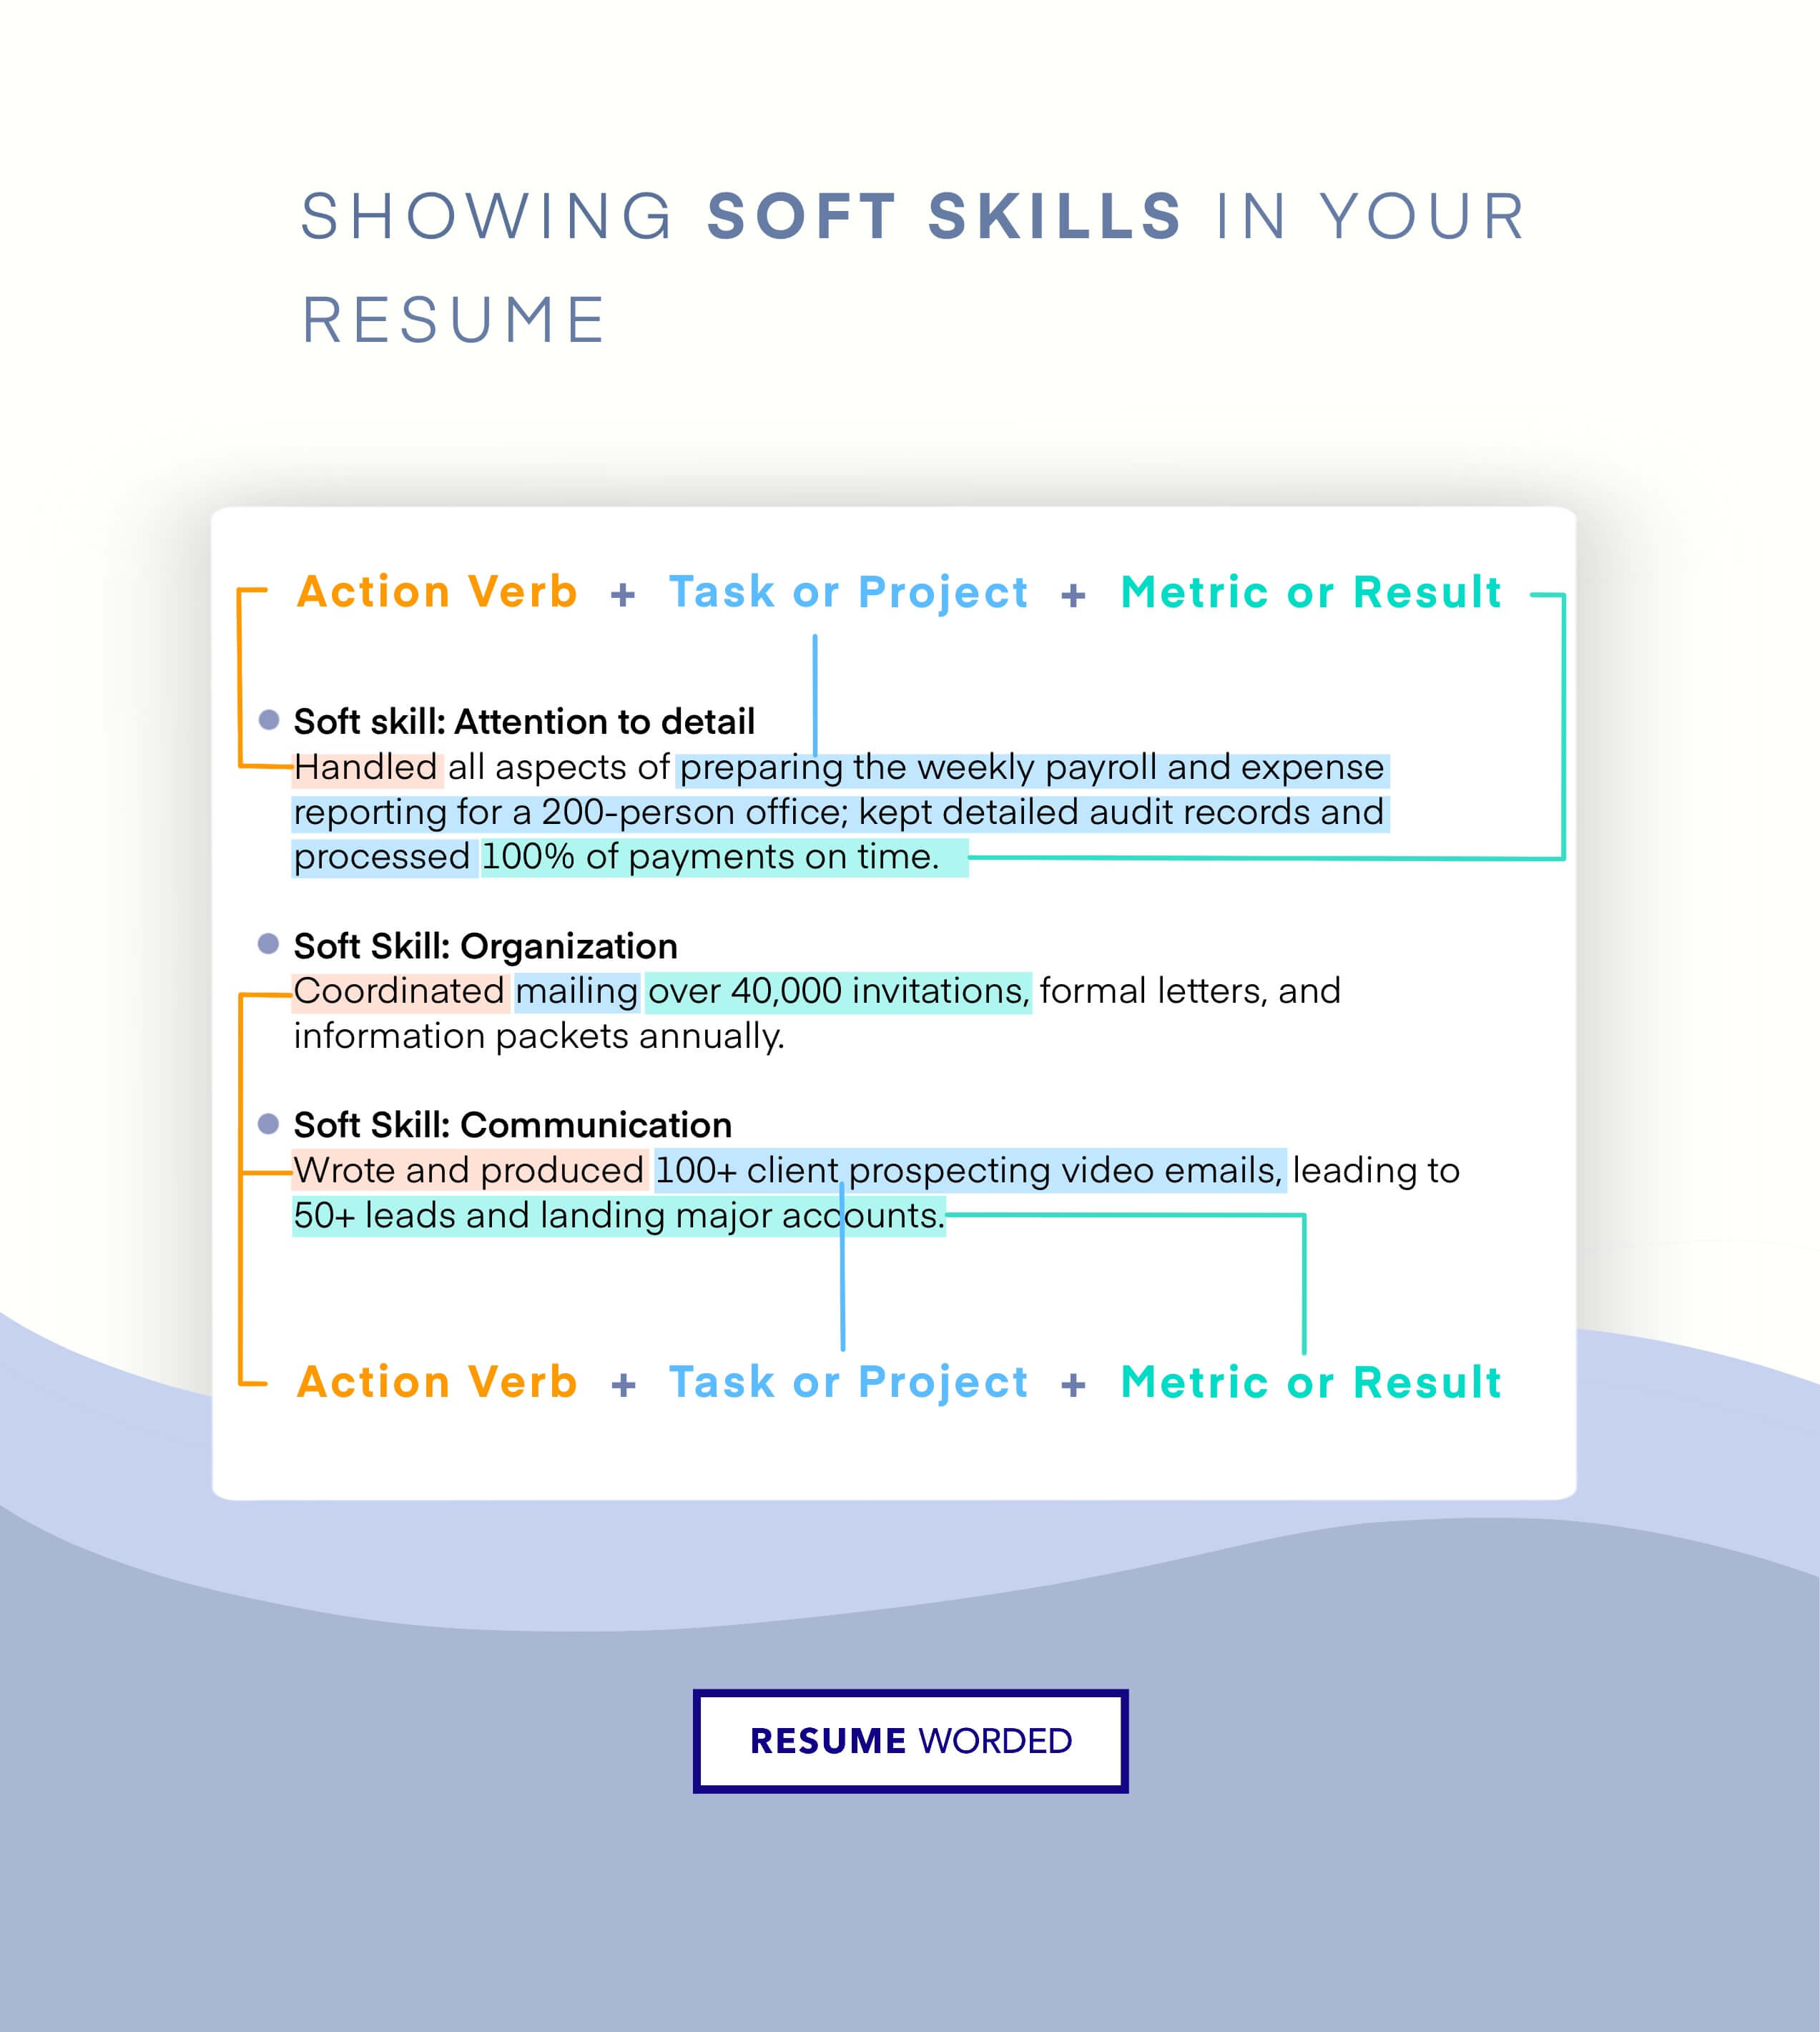 How To Demonstrate Soft Skills On Your Resume